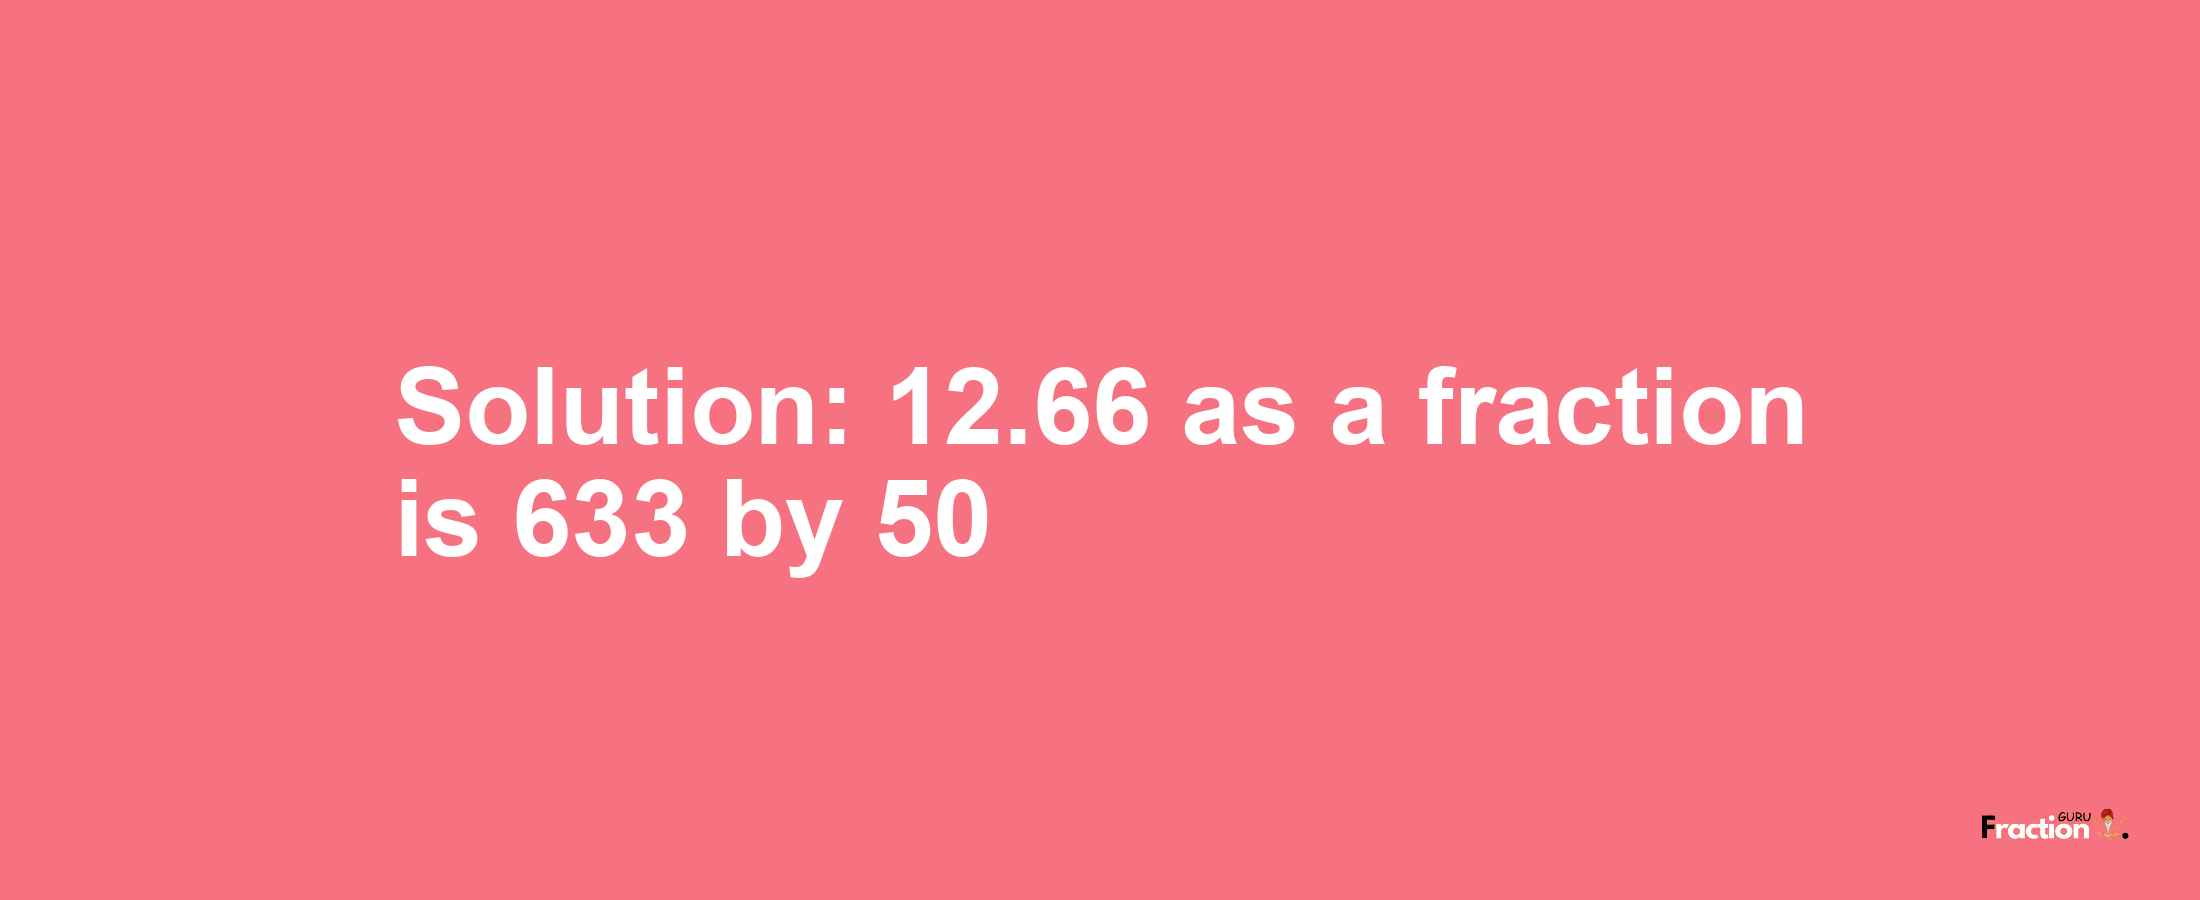 Solution:12.66 as a fraction is 633/50